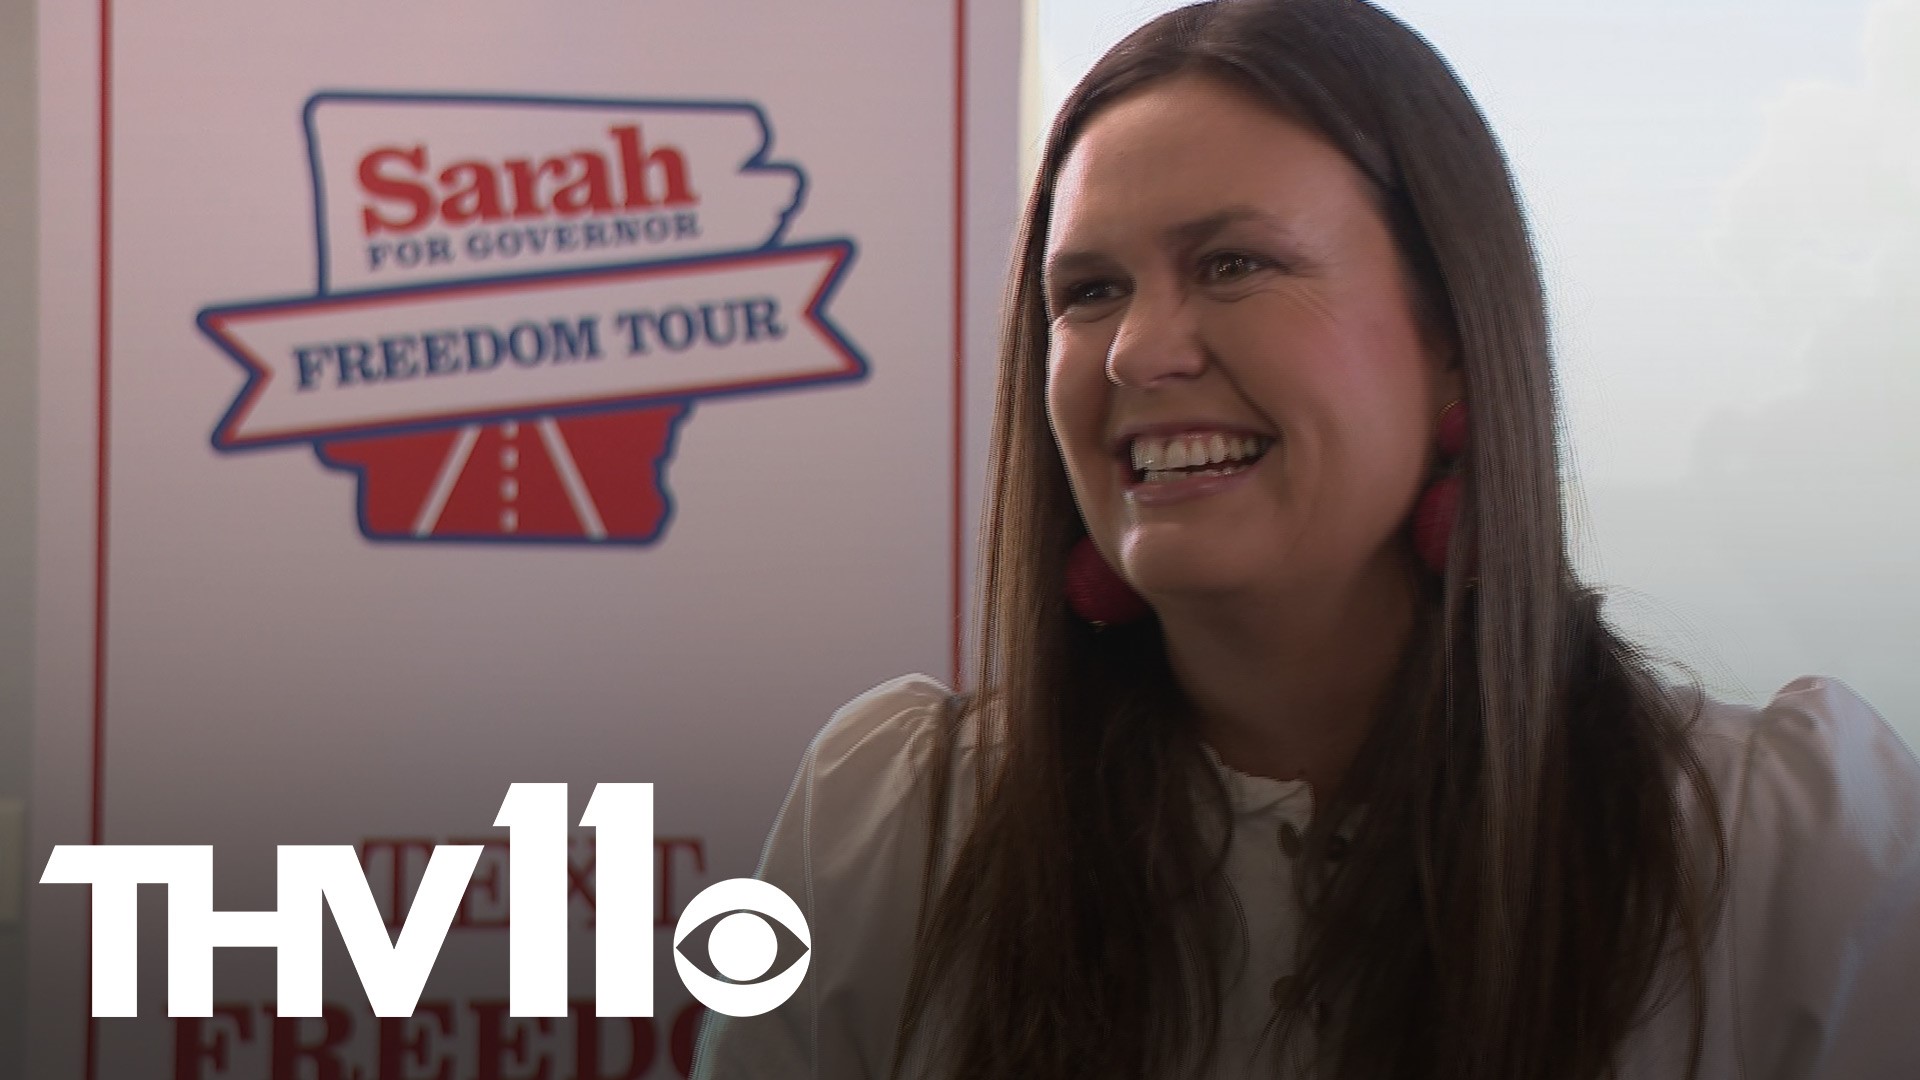 Sarah Huckabee Sanders spoke with us on her campaign tour for Arkansas governor and talked abortion laws and abortion restrictions.